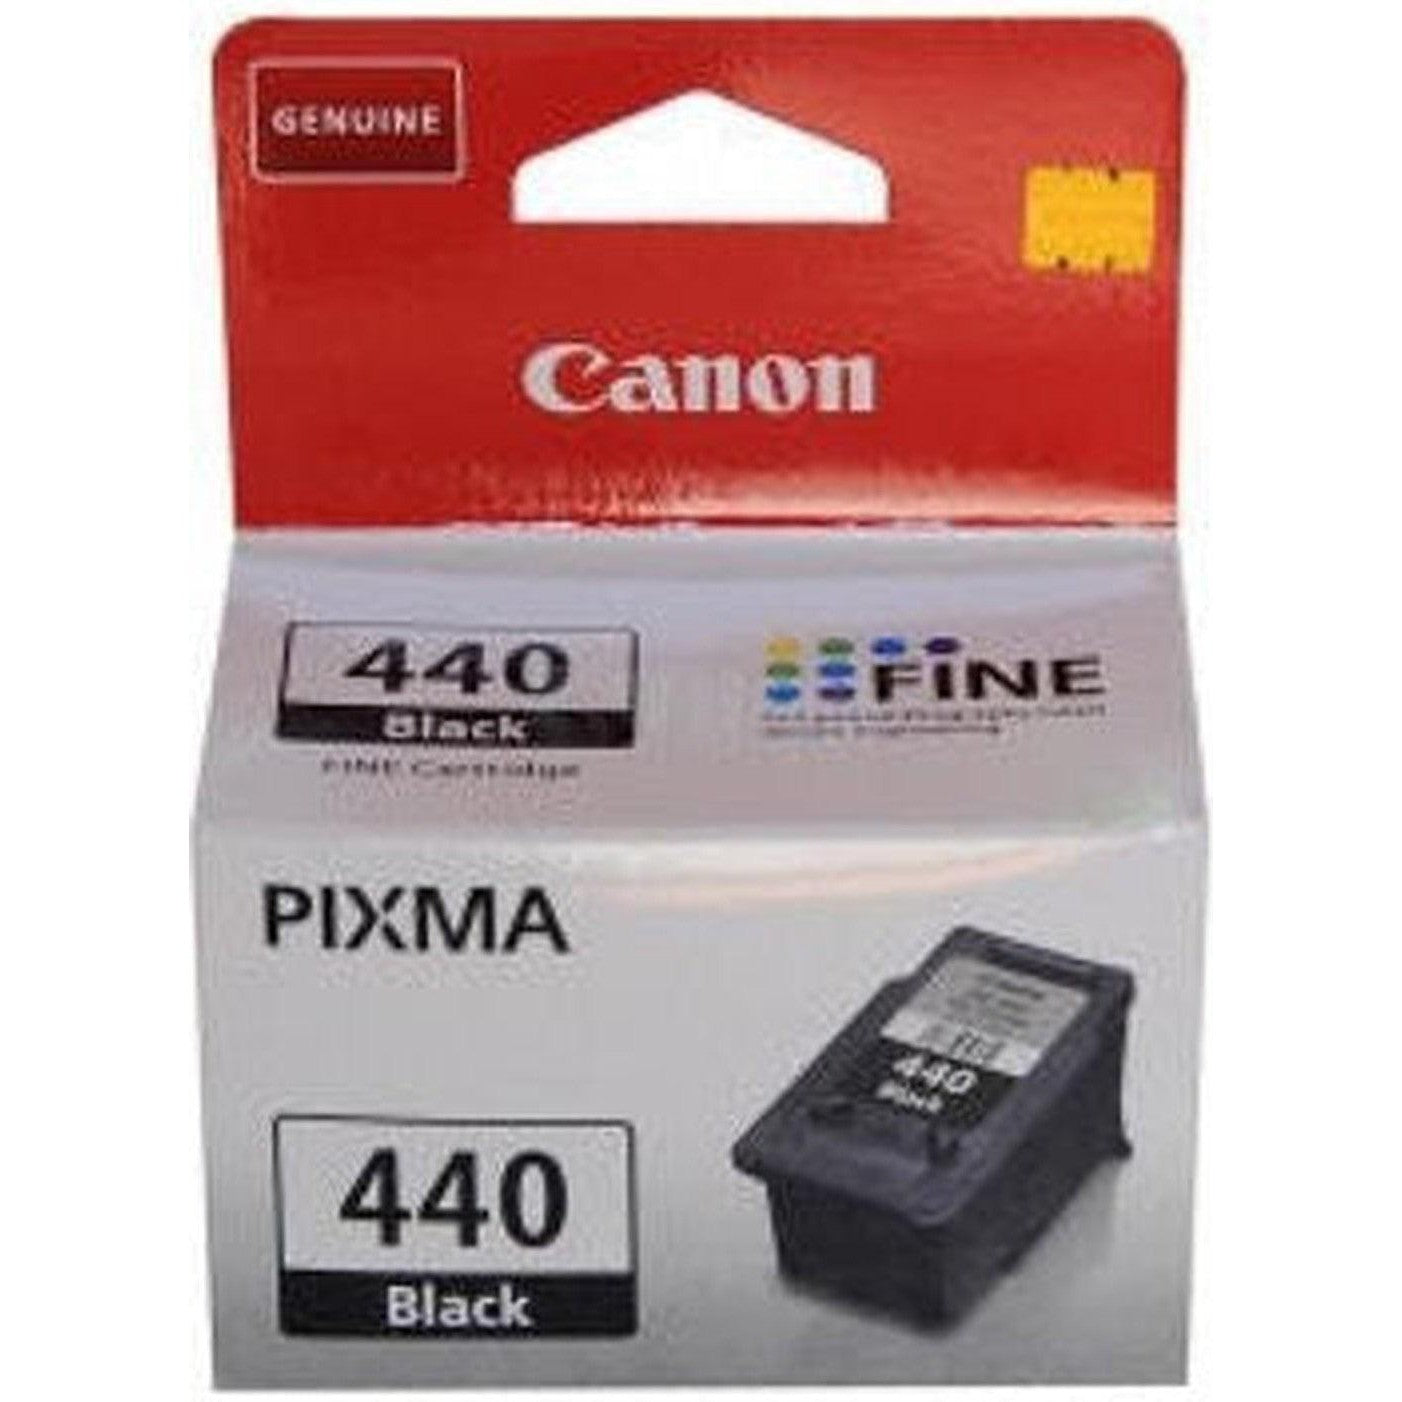 Canon Pg 440 Ink Cartridge Black-Inks And Toners-Canon-Star Light Kuwait